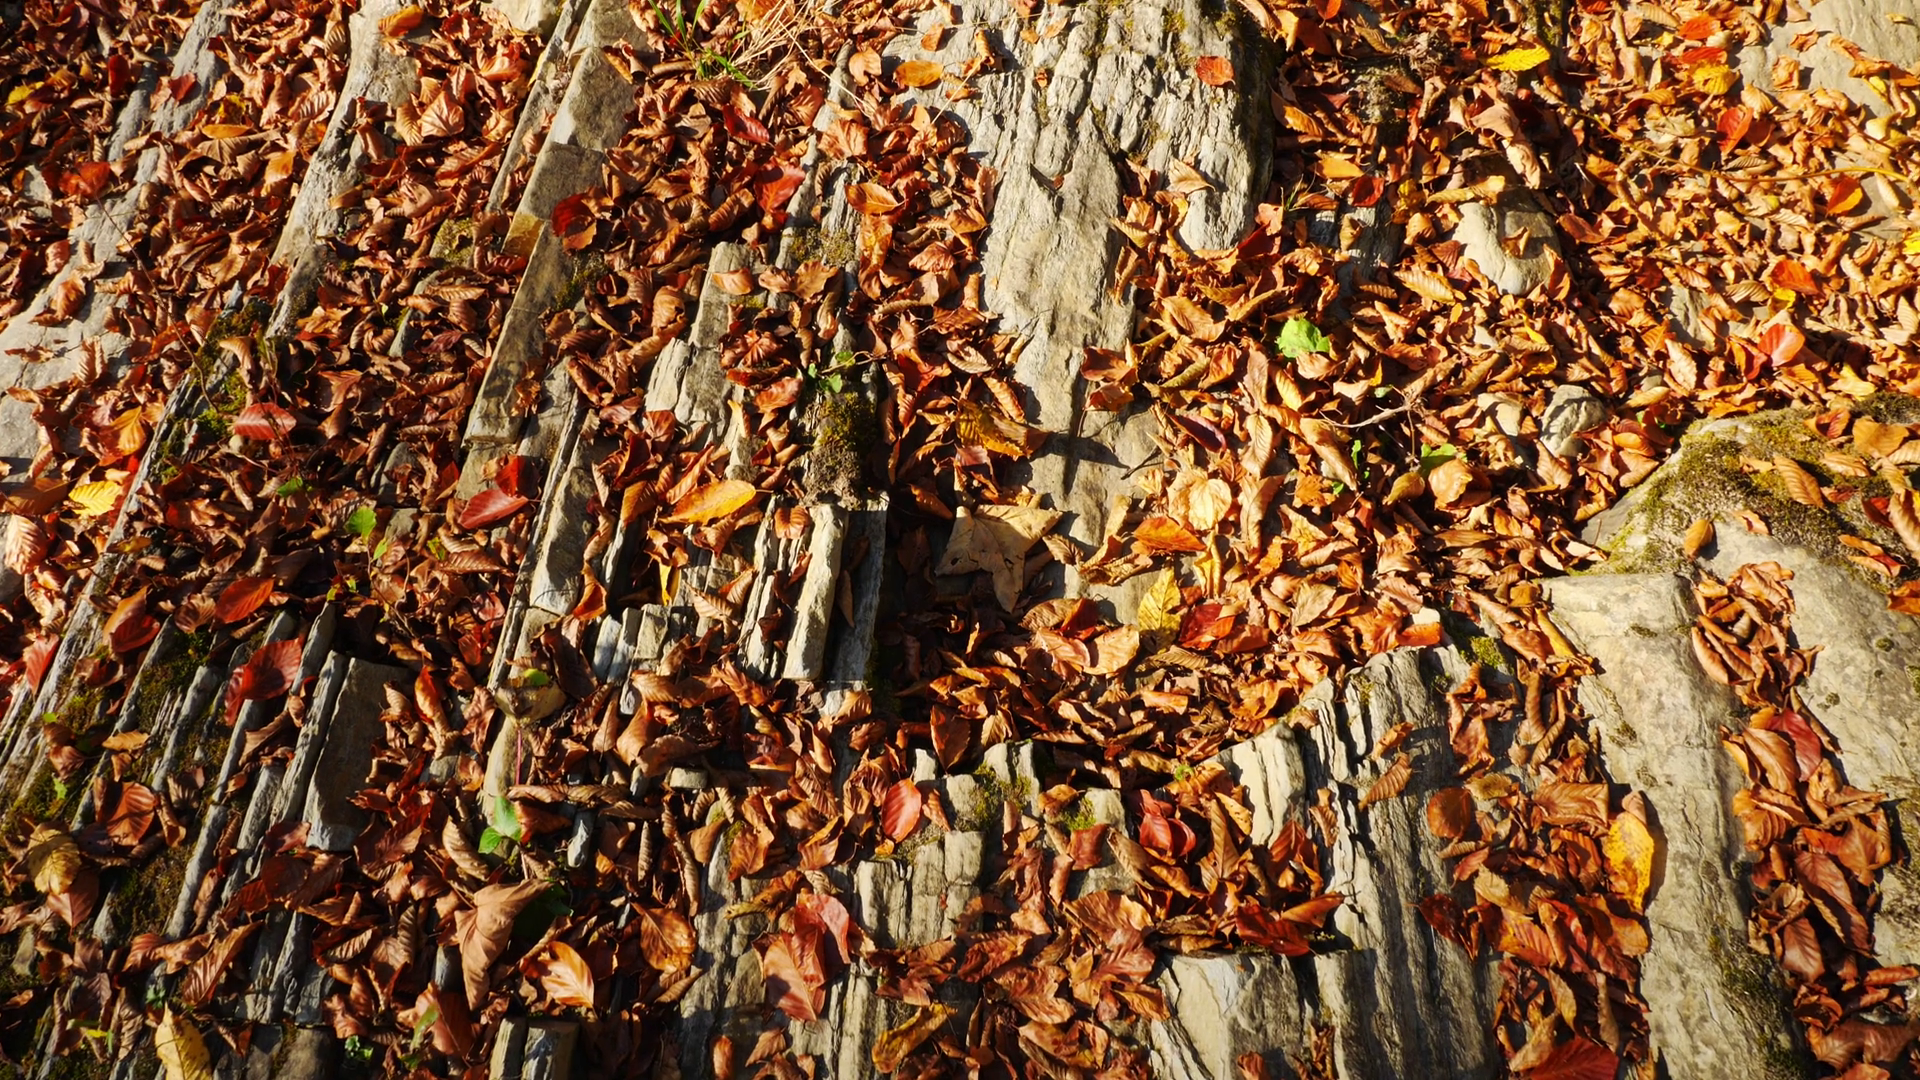 Camera movement on the rock with fallen leaves in the autumn forest ...